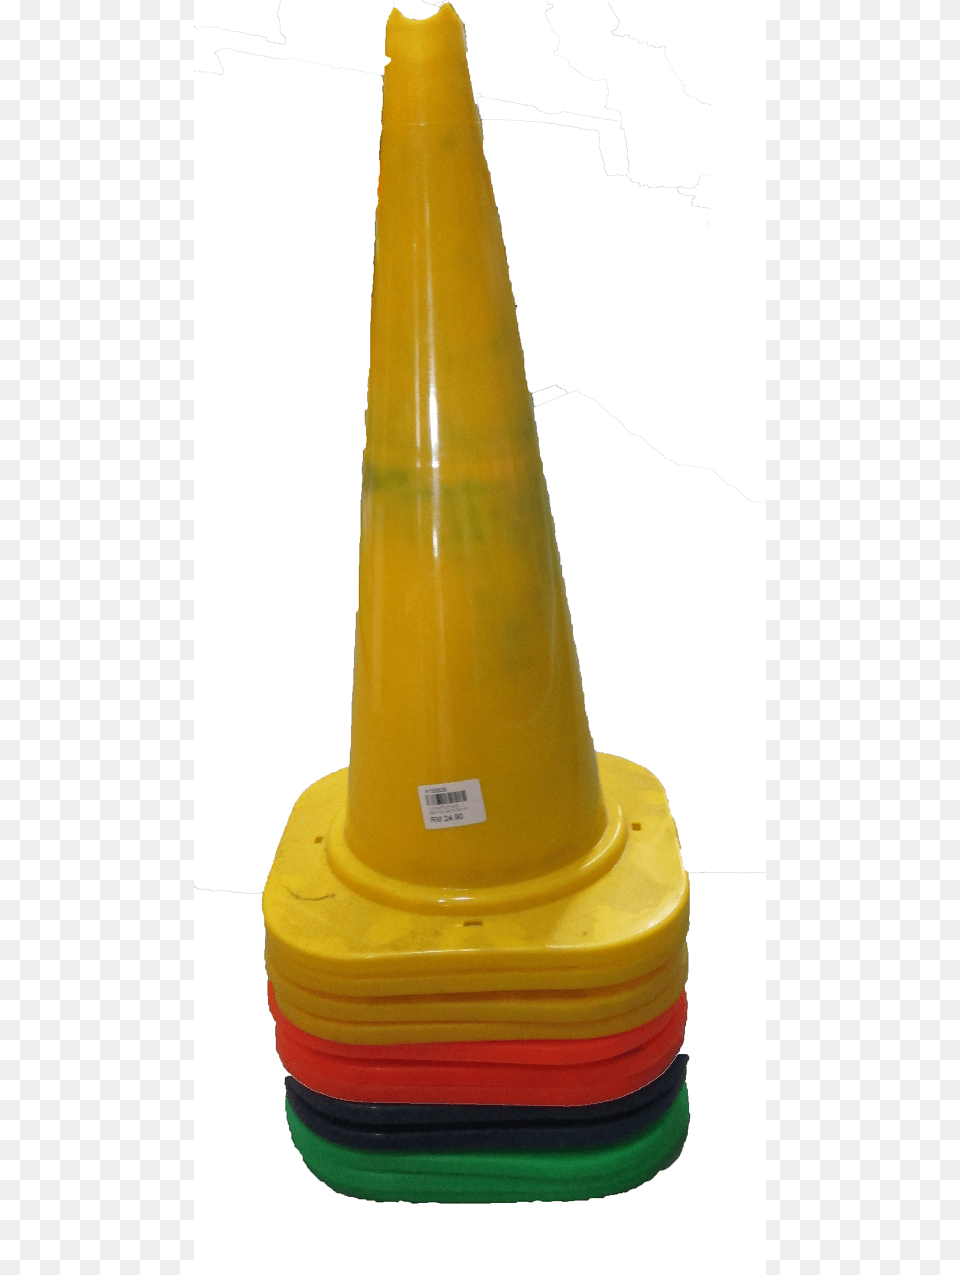 Lamp, Cone, Fire Hydrant, Hydrant Free Png